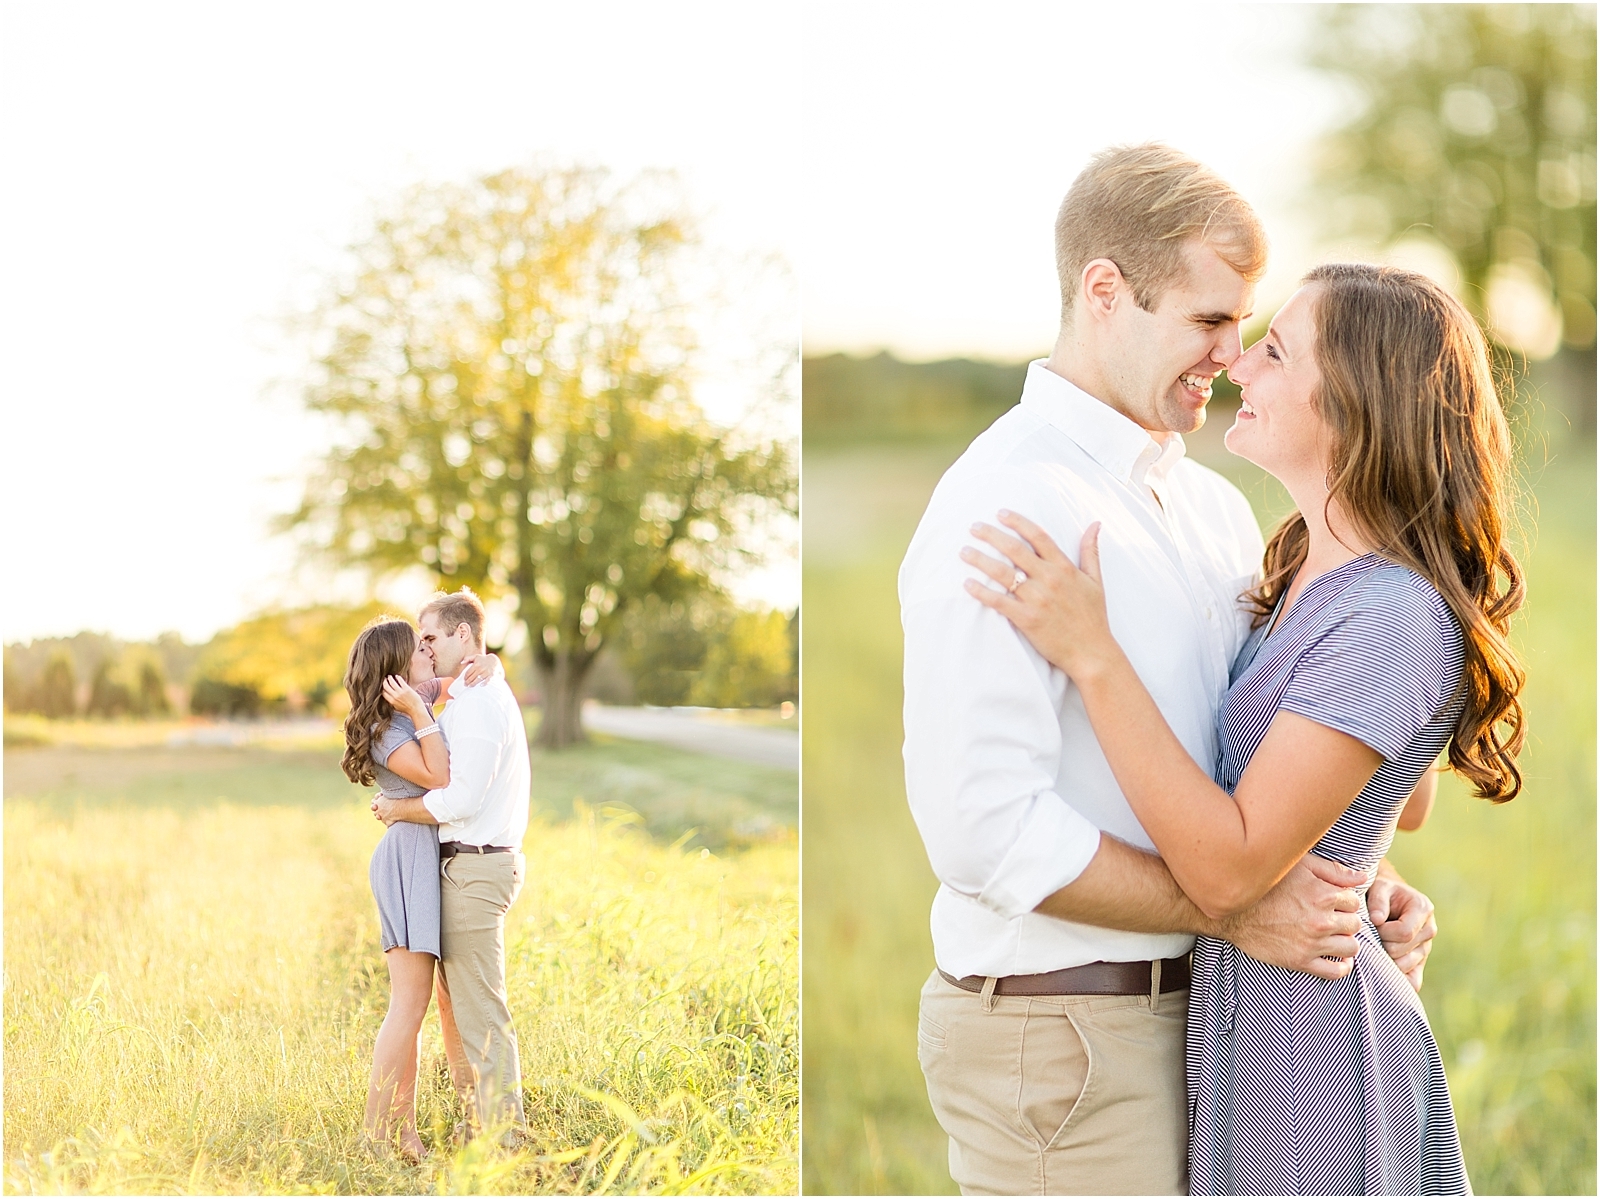 Stacey and Thomas | Engaged0020.jpg